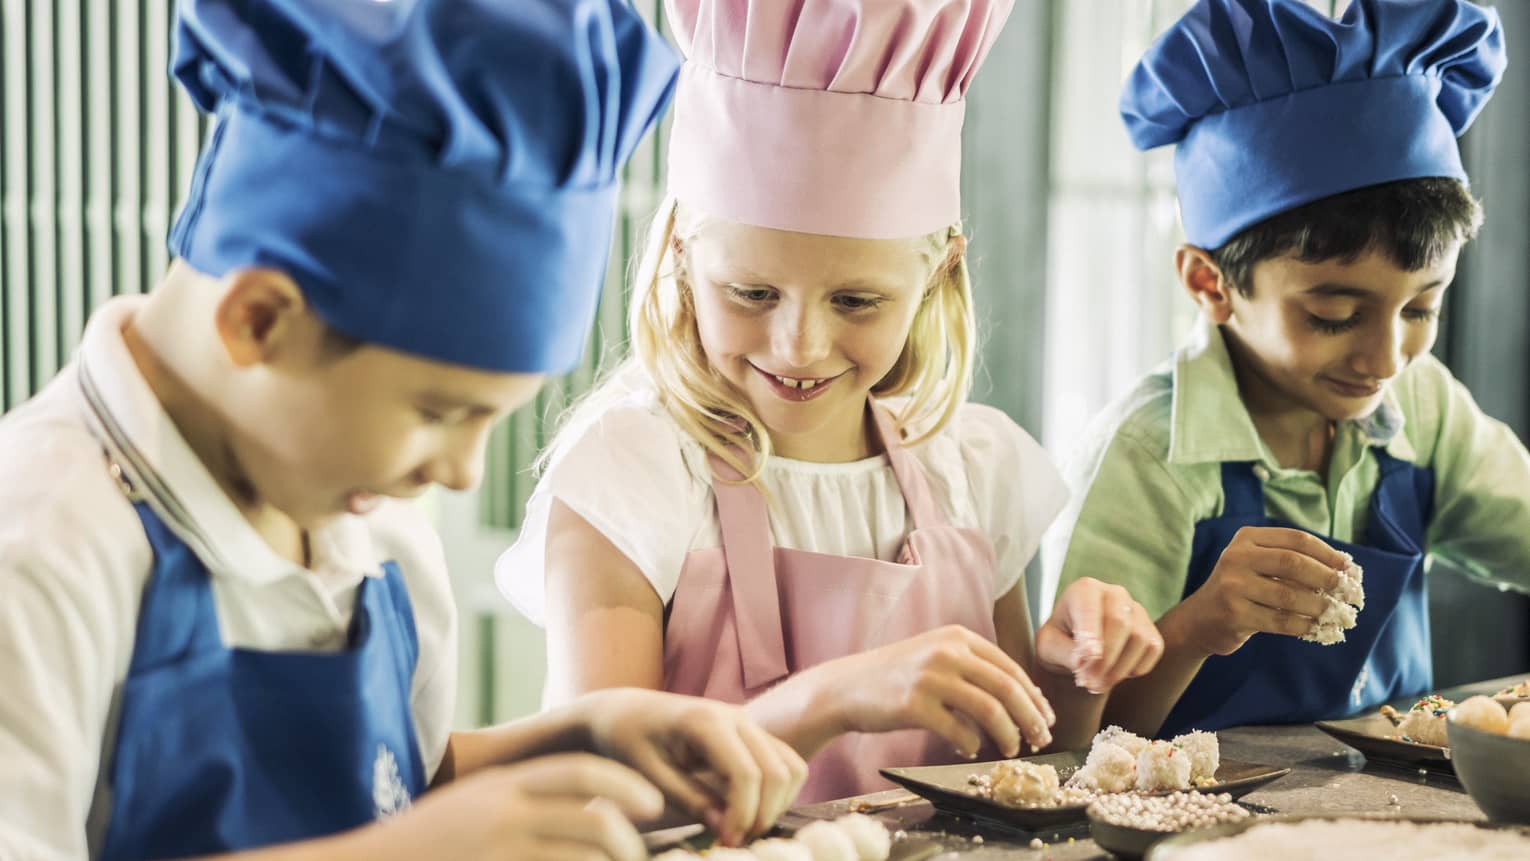 Three children in chef hats, aprons roll pastries at counter 